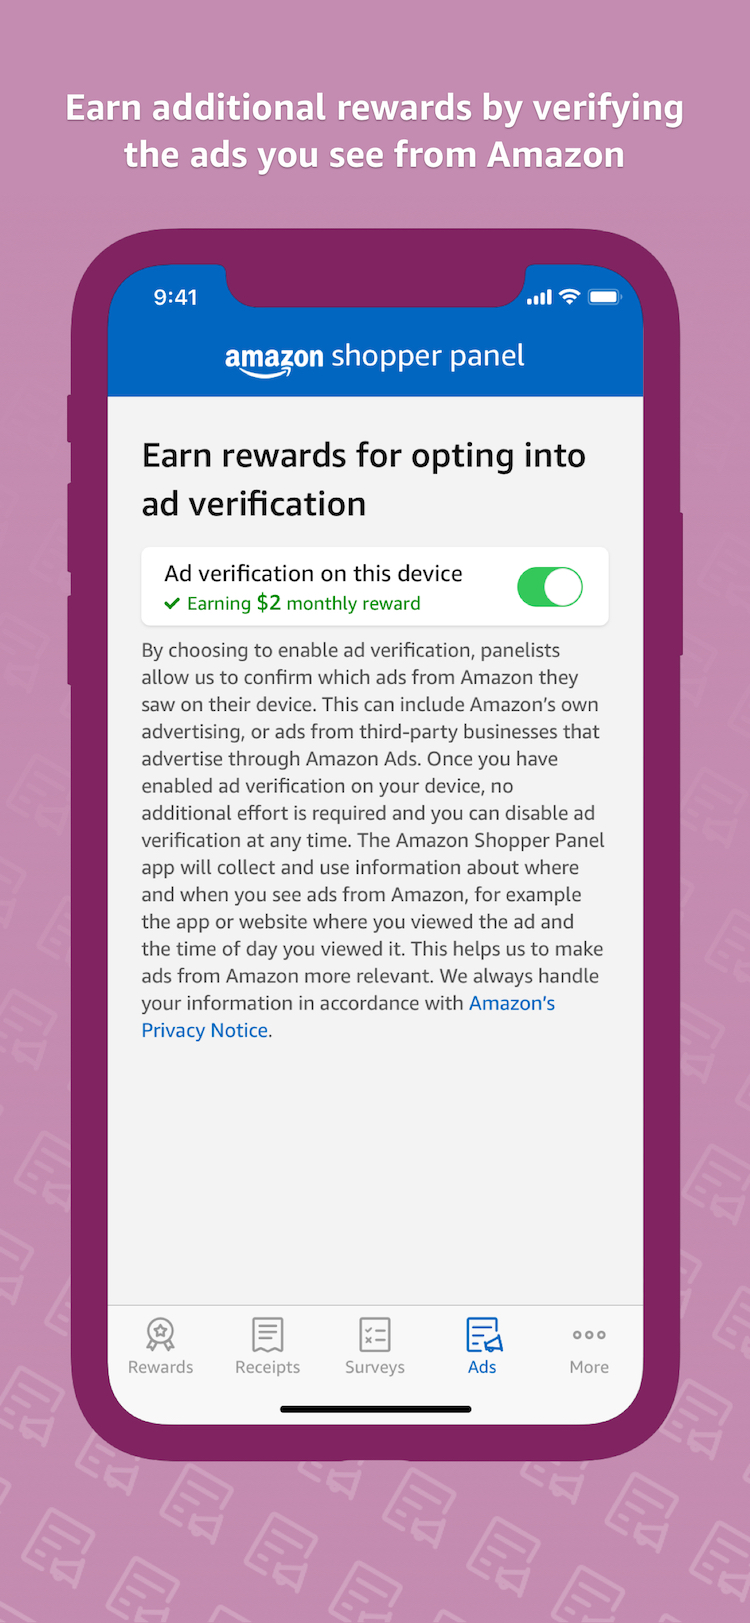 Just a quick toggle permits Amazon to snoop on your phone.